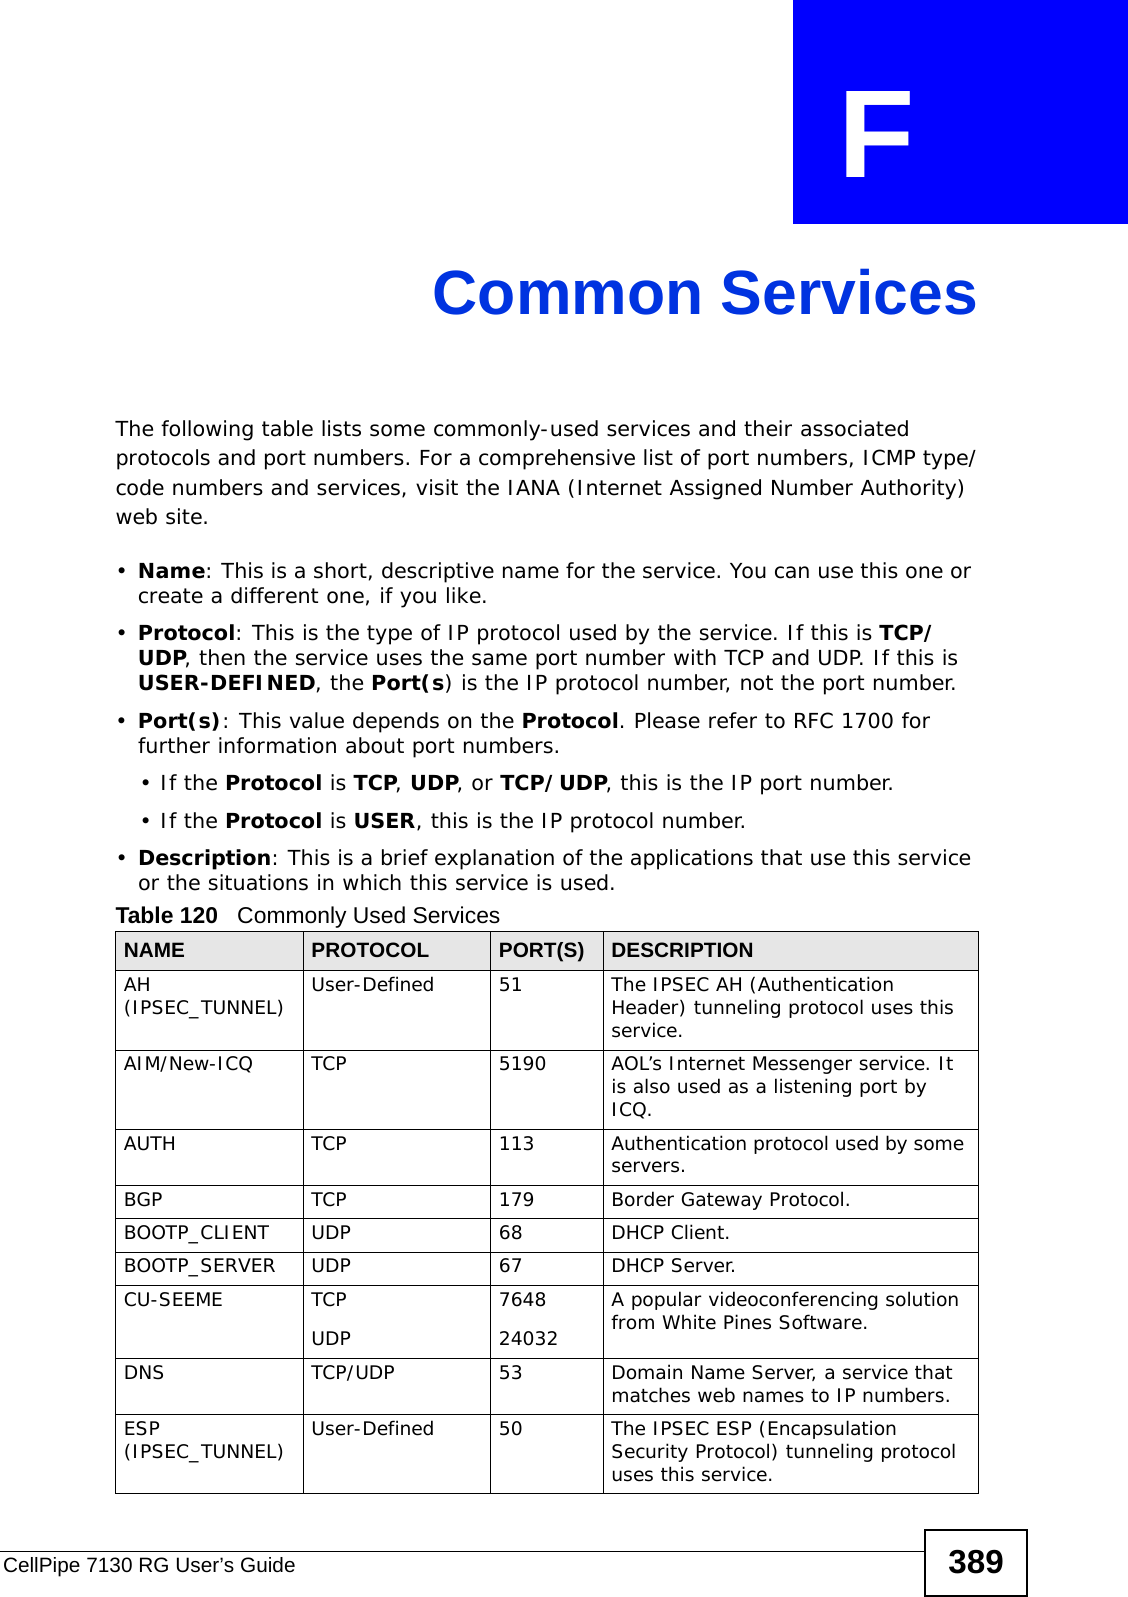 CellPipe 7130 RG User’s Guide 389APPENDIX  F Common ServicesThe following table lists some commonly-used services and their associated protocols and port numbers. For a comprehensive list of port numbers, ICMP type/code numbers and services, visit the IANA (Internet Assigned Number Authority) web site. •Name: This is a short, descriptive name for the service. You can use this one or create a different one, if you like.•Protocol: This is the type of IP protocol used by the service. If this is TCP/UDP, then the service uses the same port number with TCP and UDP. If this is USER-DEFINED, the Port(s) is the IP protocol number, not the port number.•Port(s): This value depends on the Protocol. Please refer to RFC 1700 for further information about port numbers.•If the Protocol is TCP, UDP, or TCP/UDP, this is the IP port number.•If the Protocol is USER, this is the IP protocol number.•Description: This is a brief explanation of the applications that use this service or the situations in which this service is used.Table 120   Commonly Used ServicesNAME PROTOCOL PORT(S) DESCRIPTIONAH (IPSEC_TUNNEL) User-Defined 51 The IPSEC AH (Authentication Header) tunneling protocol uses this service.AIM/New-ICQ TCP 5190 AOL’s Internet Messenger service. It is also used as a listening port by ICQ.AUTH TCP 113 Authentication protocol used by some servers.BGP TCP 179 Border Gateway Protocol.BOOTP_CLIENT UDP 68 DHCP Client.BOOTP_SERVER UDP 67 DHCP Server.CU-SEEME TCPUDP764824032A popular videoconferencing solution from White Pines Software.DNS TCP/UDP 53 Domain Name Server, a service that matches web names to IP numbers.ESP (IPSEC_TUNNEL) User-Defined 50 The IPSEC ESP (Encapsulation Security Protocol) tunneling protocol uses this service.